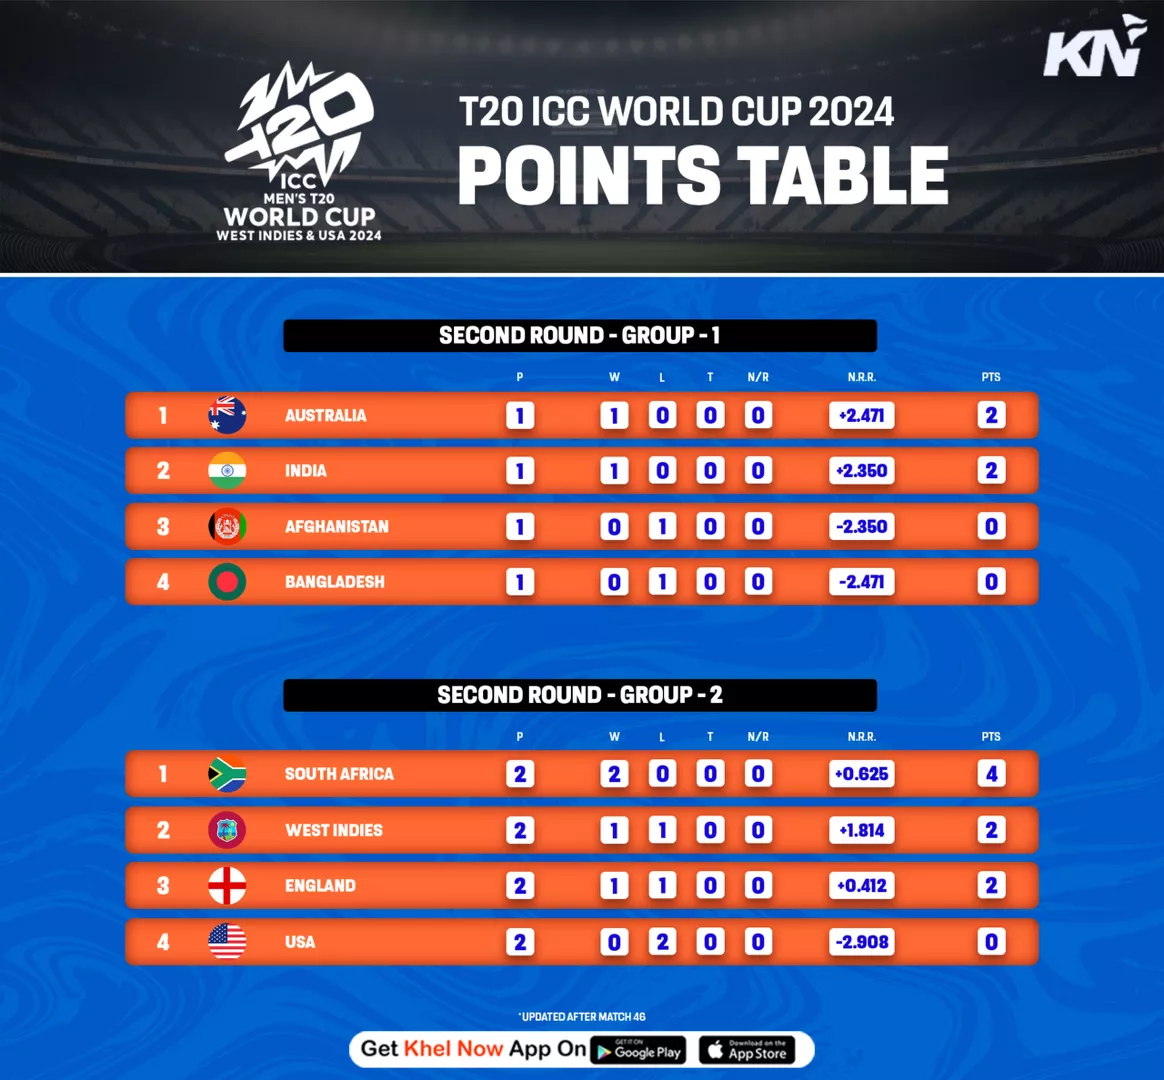 ICC T20 World Cup 2024 Super 8 standings after match 45, England vs South Africa